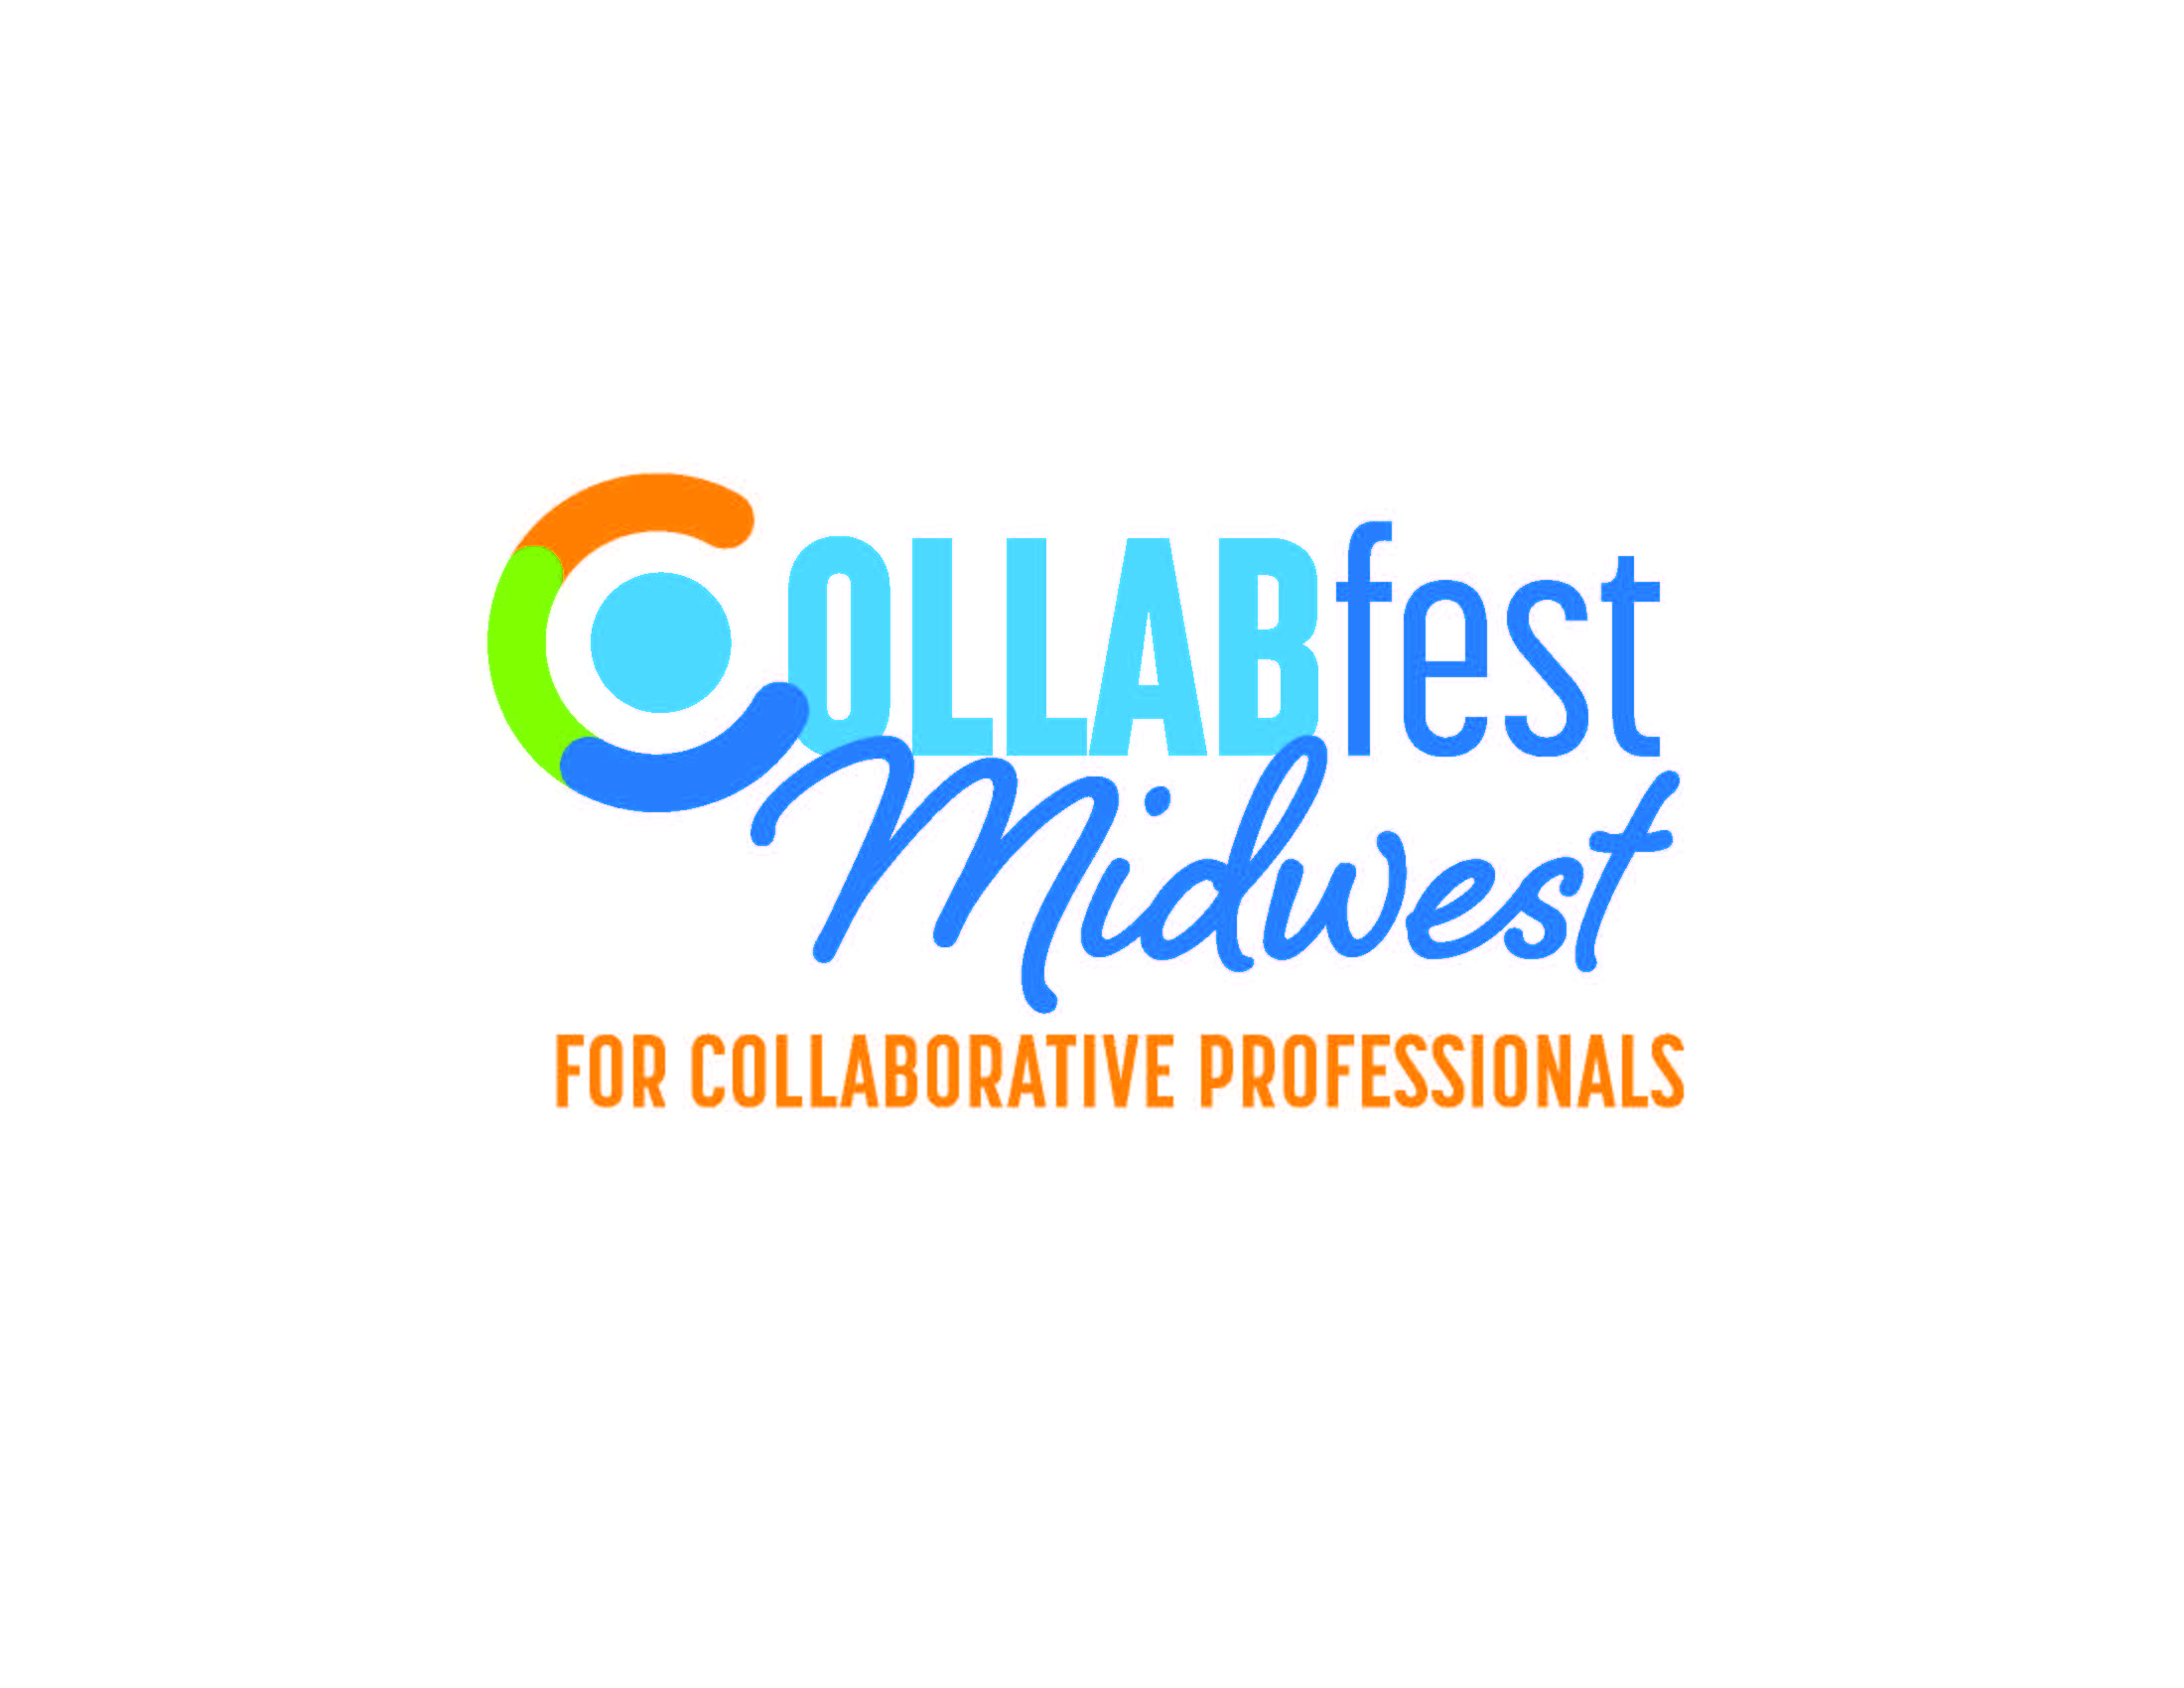 Sharing What Was Learned At Collabfest